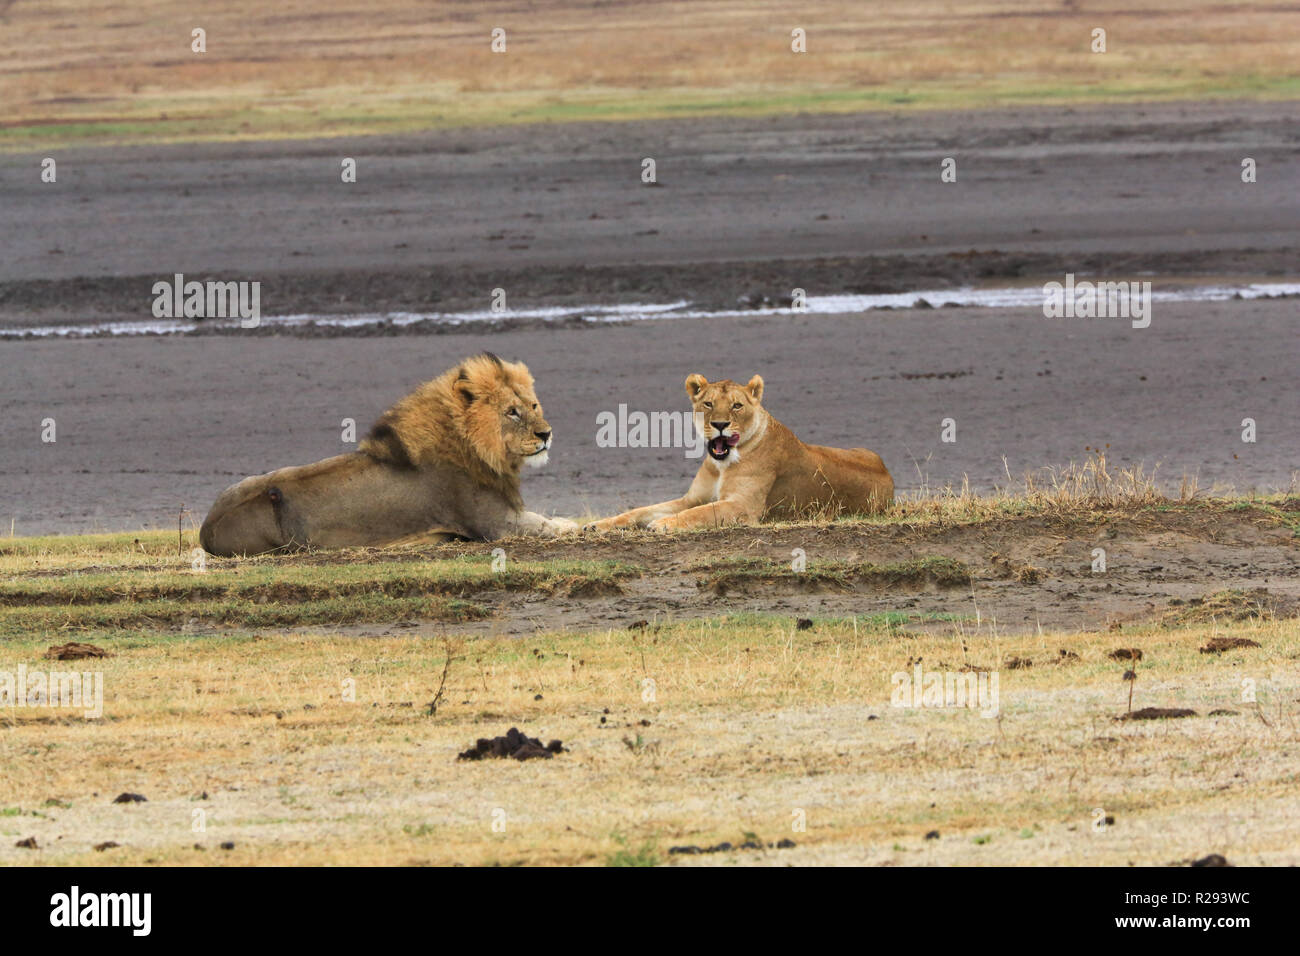 A lion and lioness preparing to mate at Ngorongoro Conservation Area, Arusha Region, Tanzania. Stock Photo